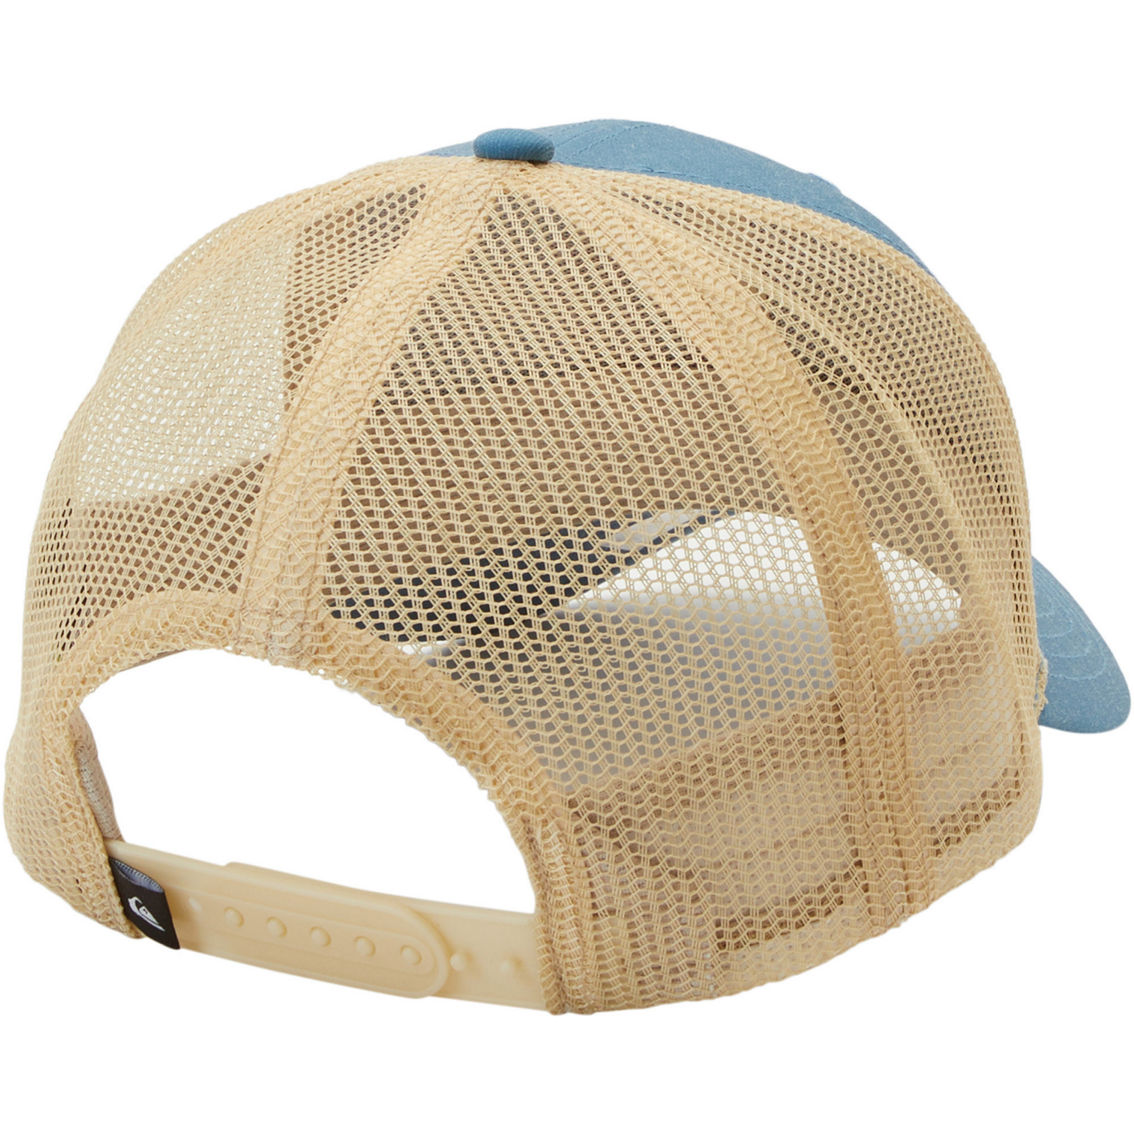 Quiksilver Weekend Rights Hat - Image 3 of 4